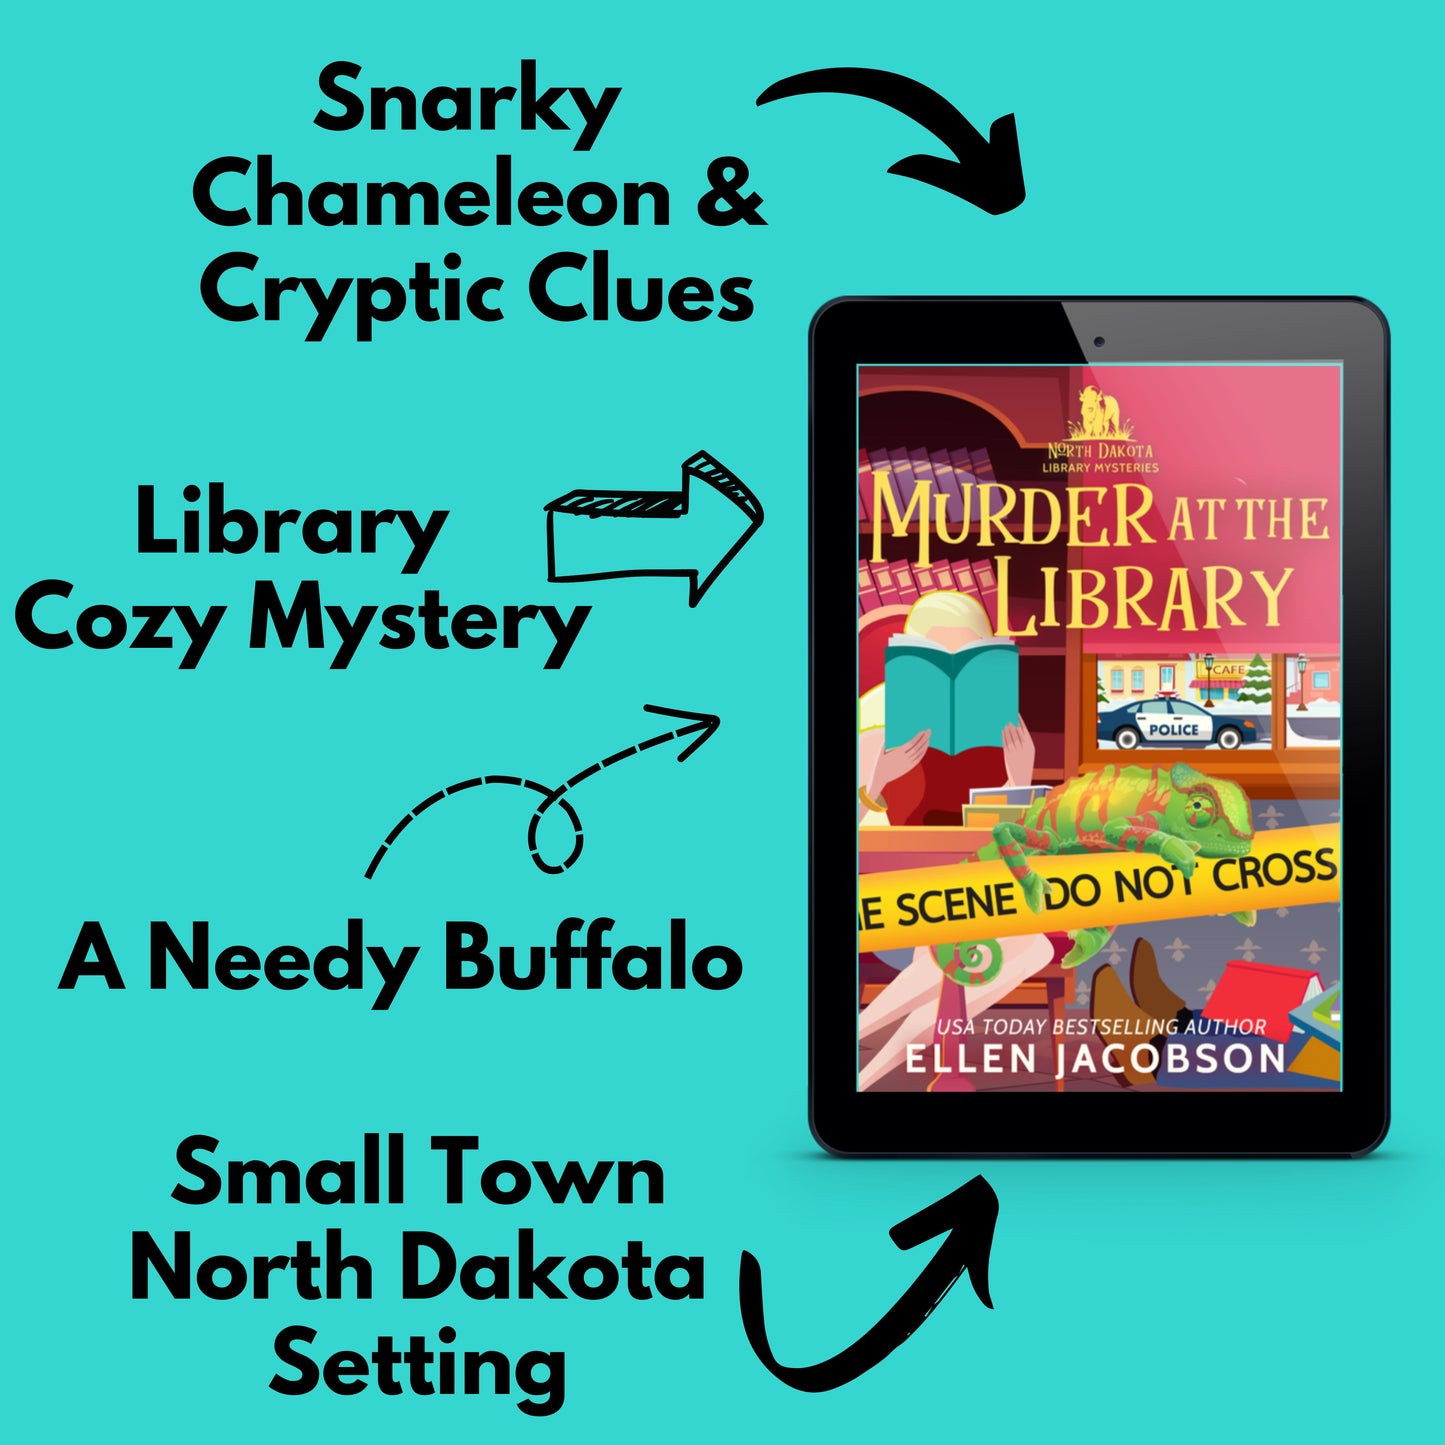 Murder at the Library ebook cover with text that says snarky chameleon, library cozy mystery, a needy buffalo, and small town North Dakota setting